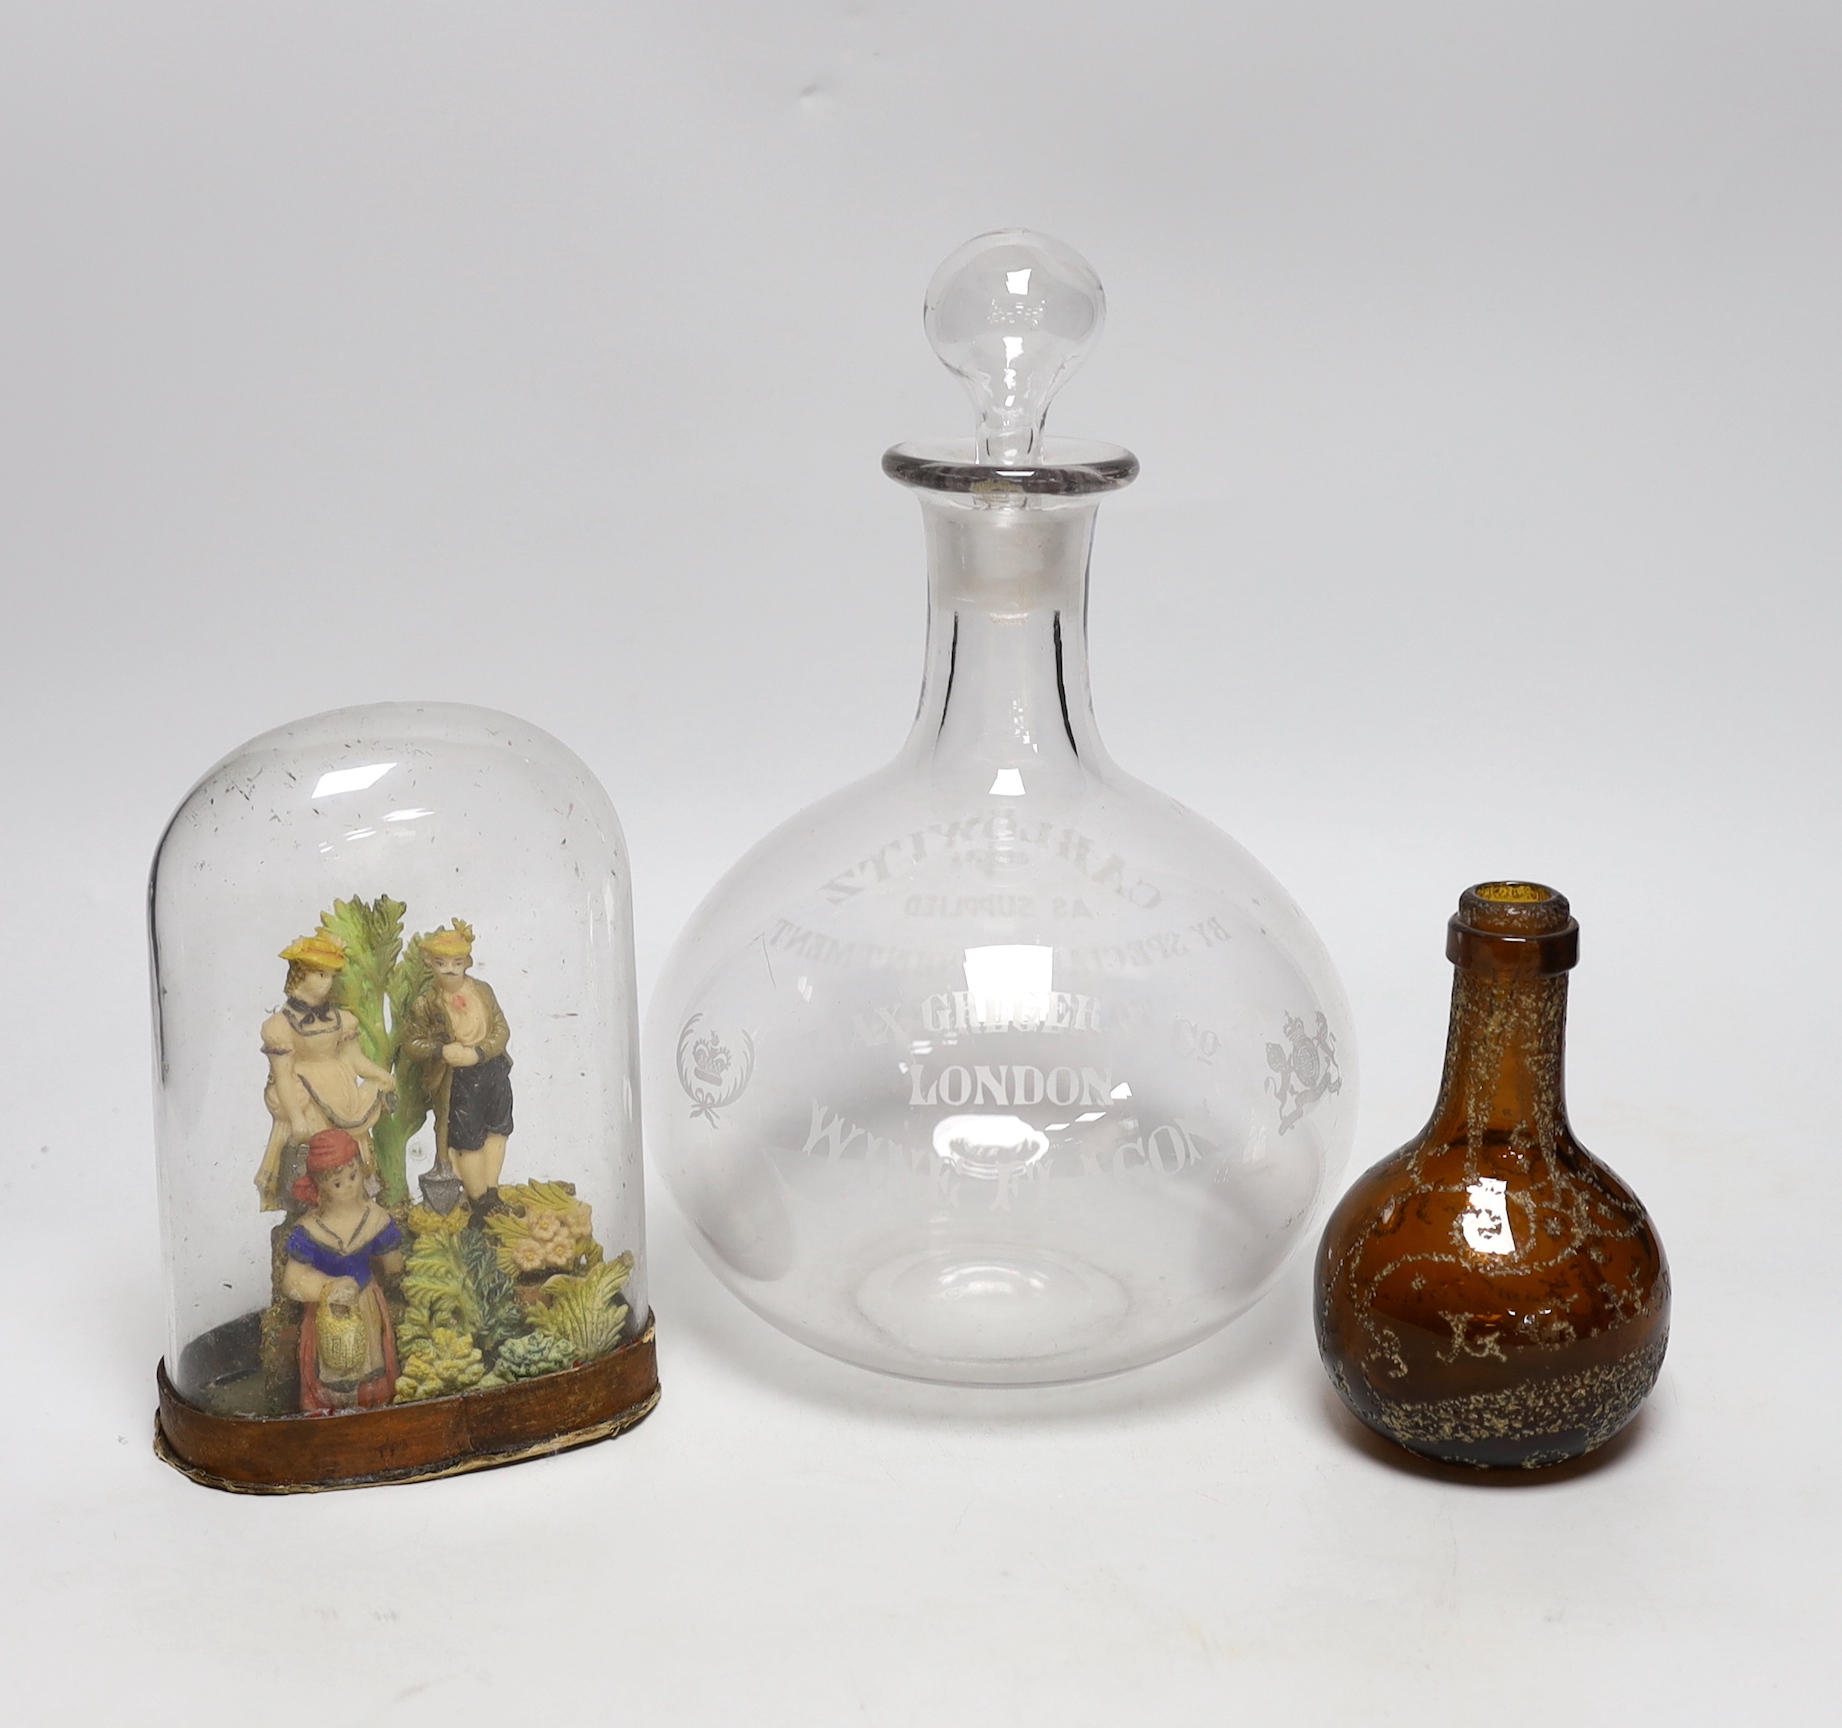 A large engraved, “Max Greger & Co London Wine Flagon”, a small amber glass bottle 1891 and a figural wax sculpture under dome, tallest flagon 26cm high